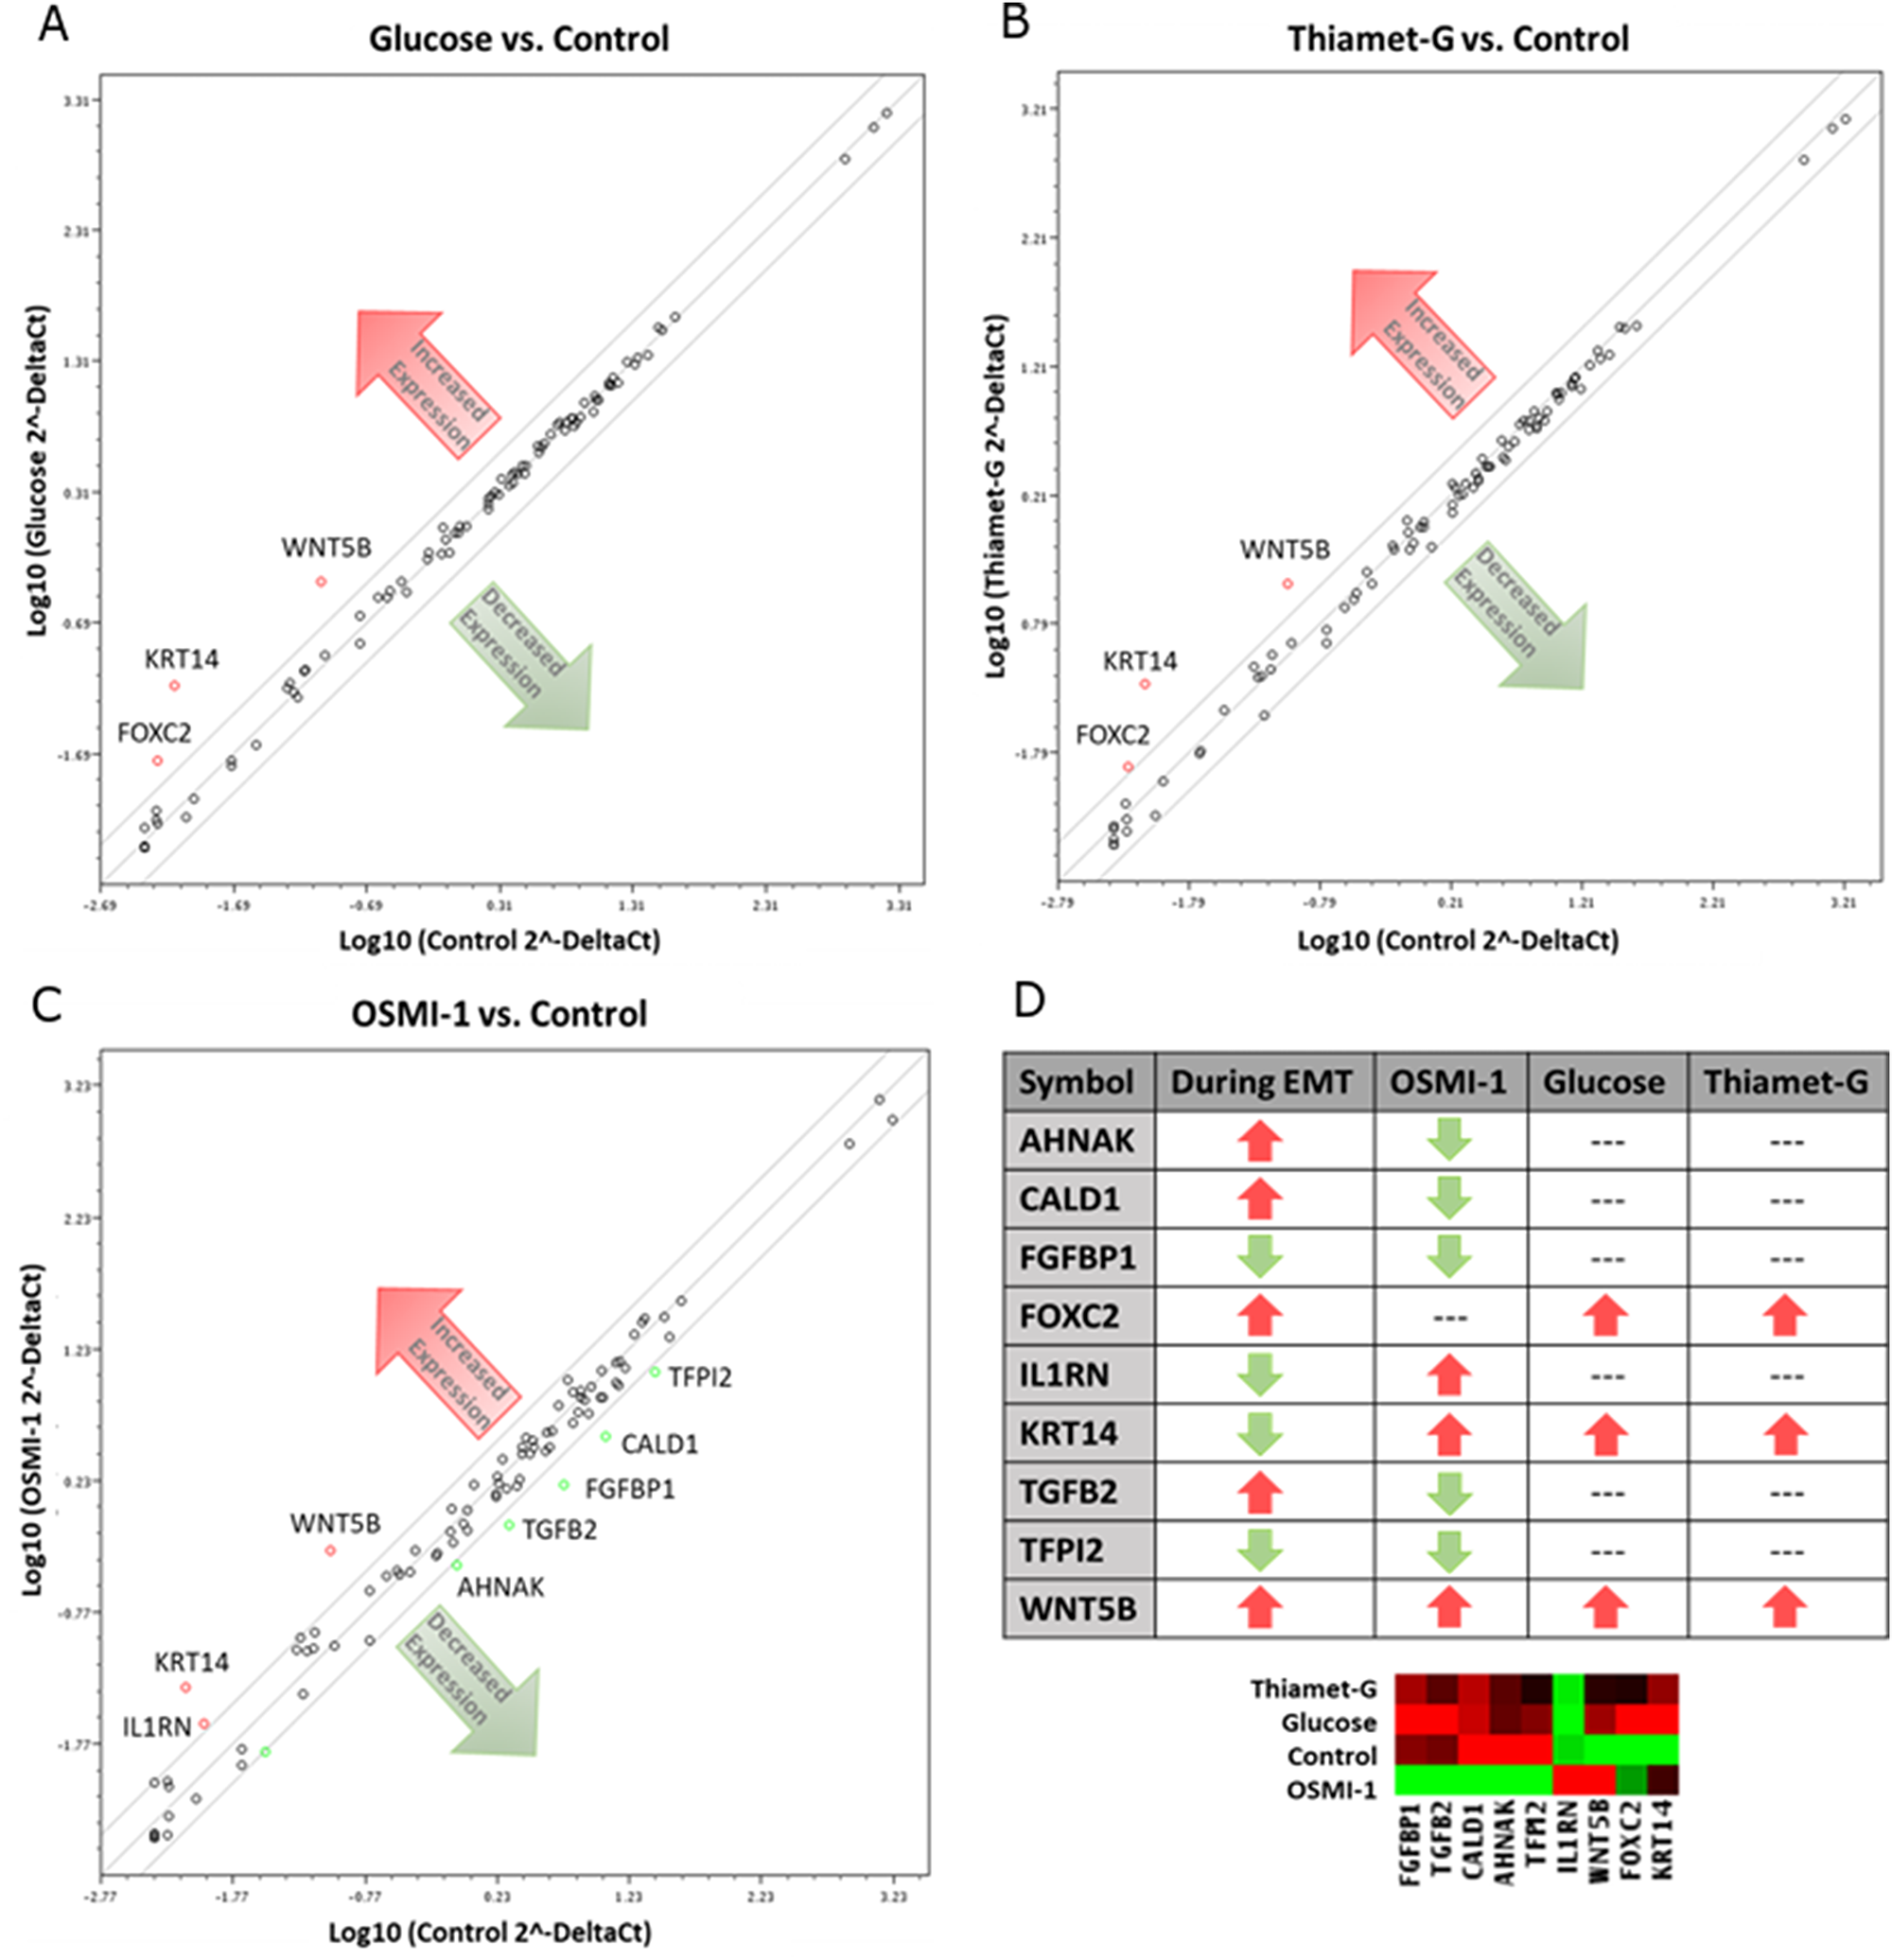 Disruption of O-GlcNAc alters gene expression in EMT related genes of Ishikawa cells.